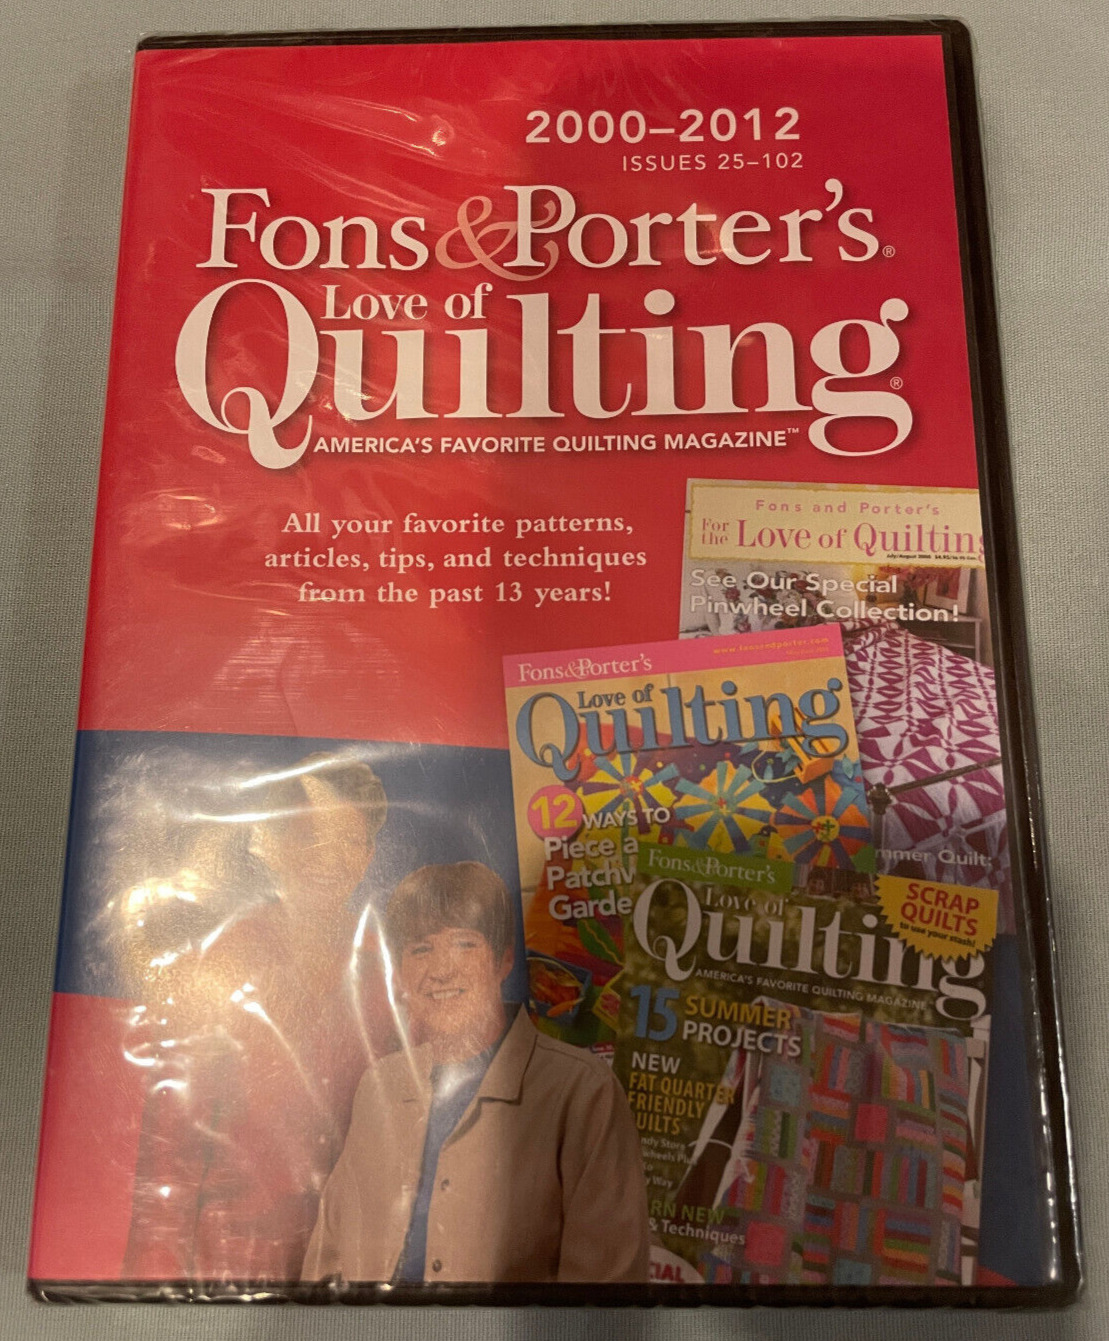 Fons & Porter\'s Love of Quilting Magazine 2000-2012 Issues 25-102 PC/Mac DVD-ROM